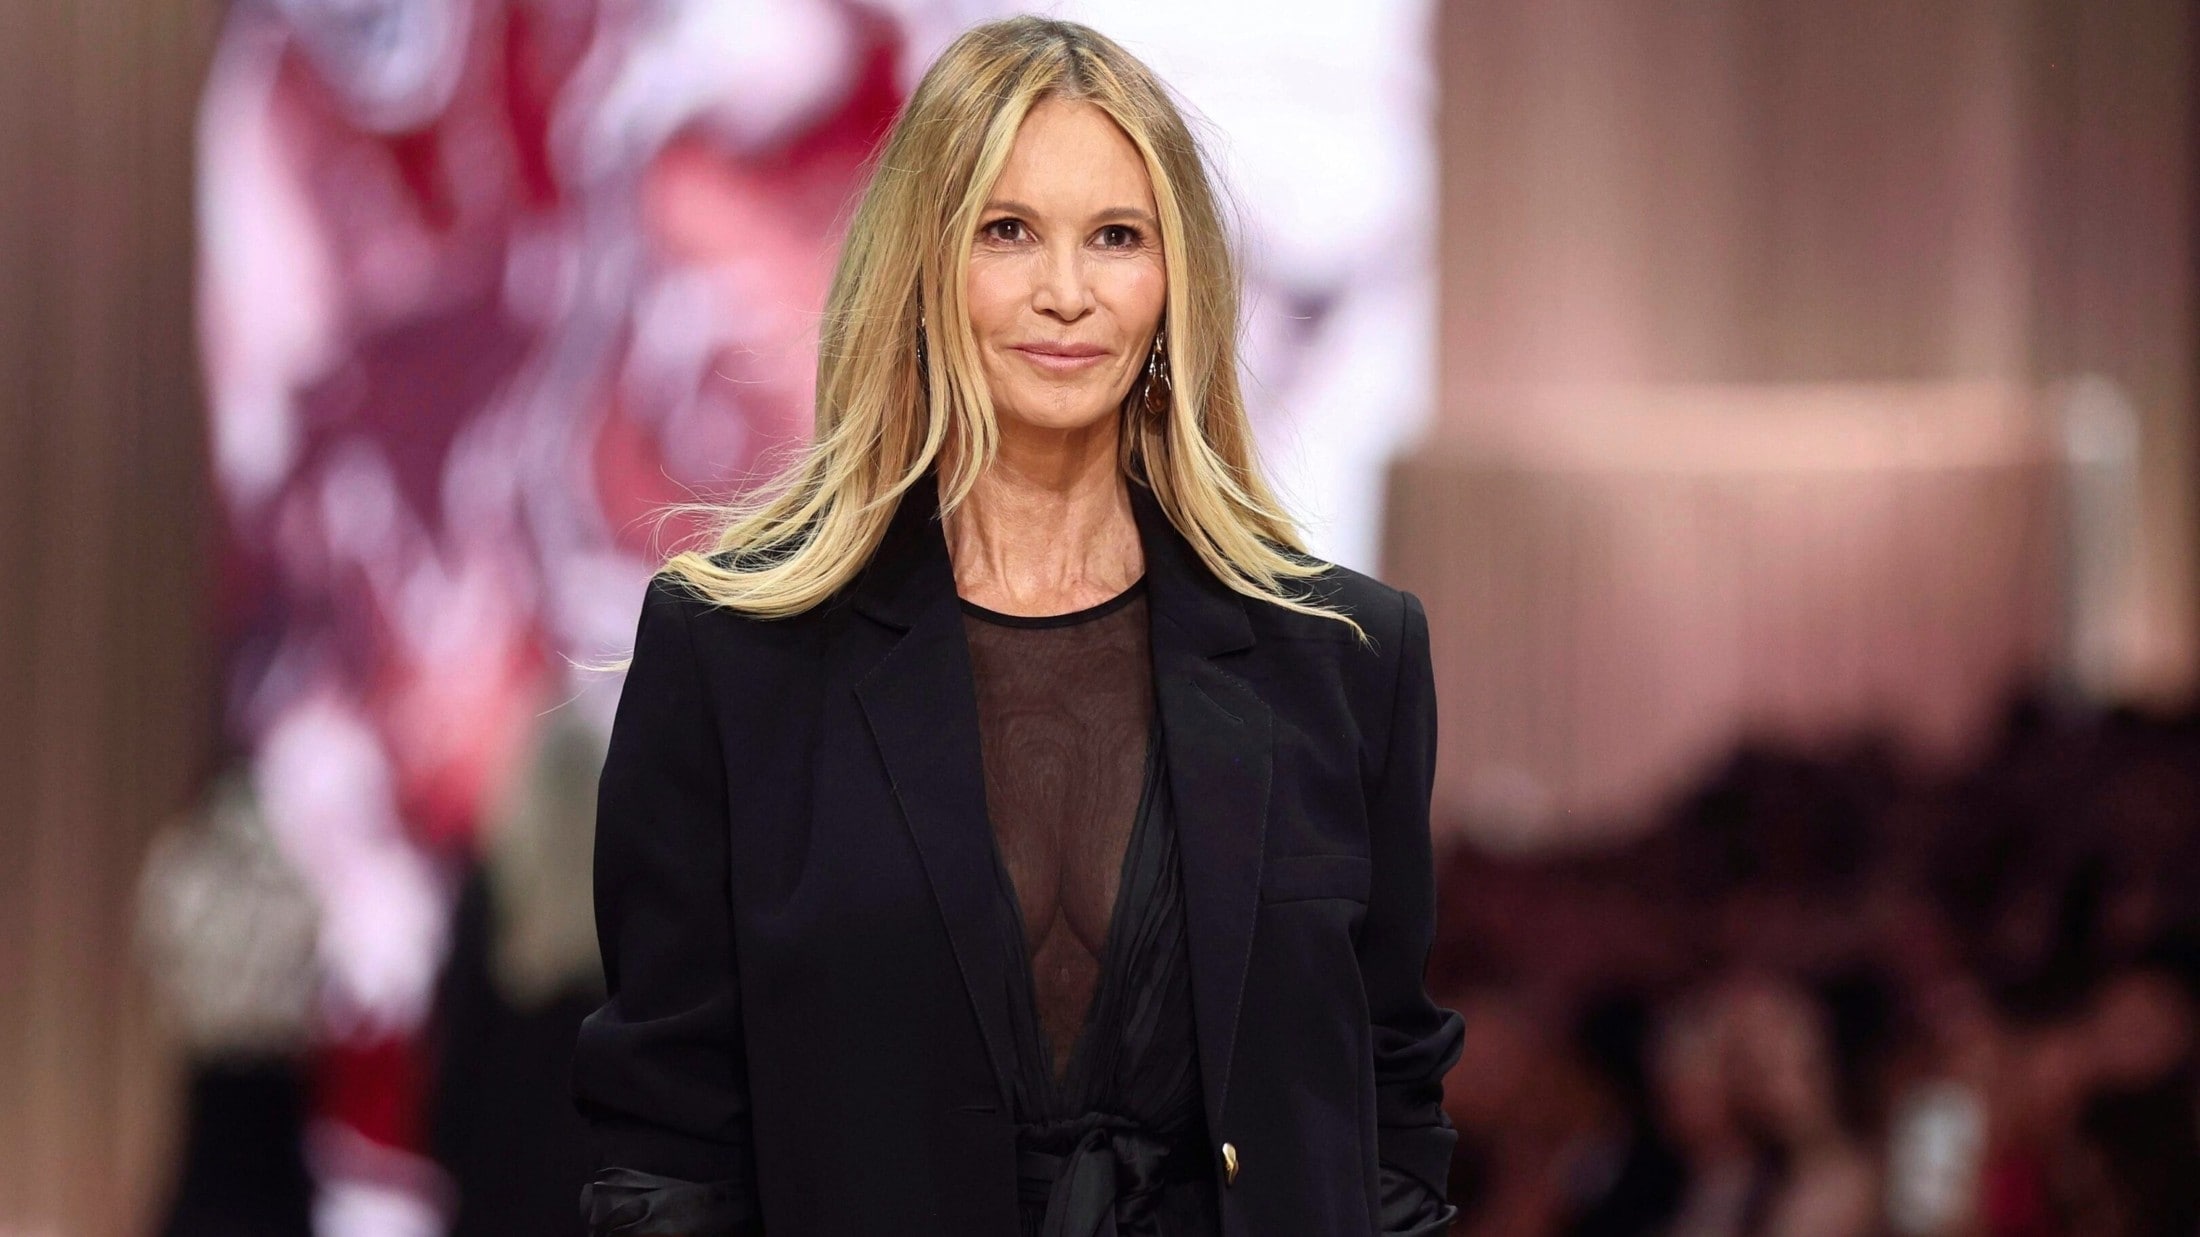 The Body is back! - Elle Macpherson back on the catwalk after 14 years